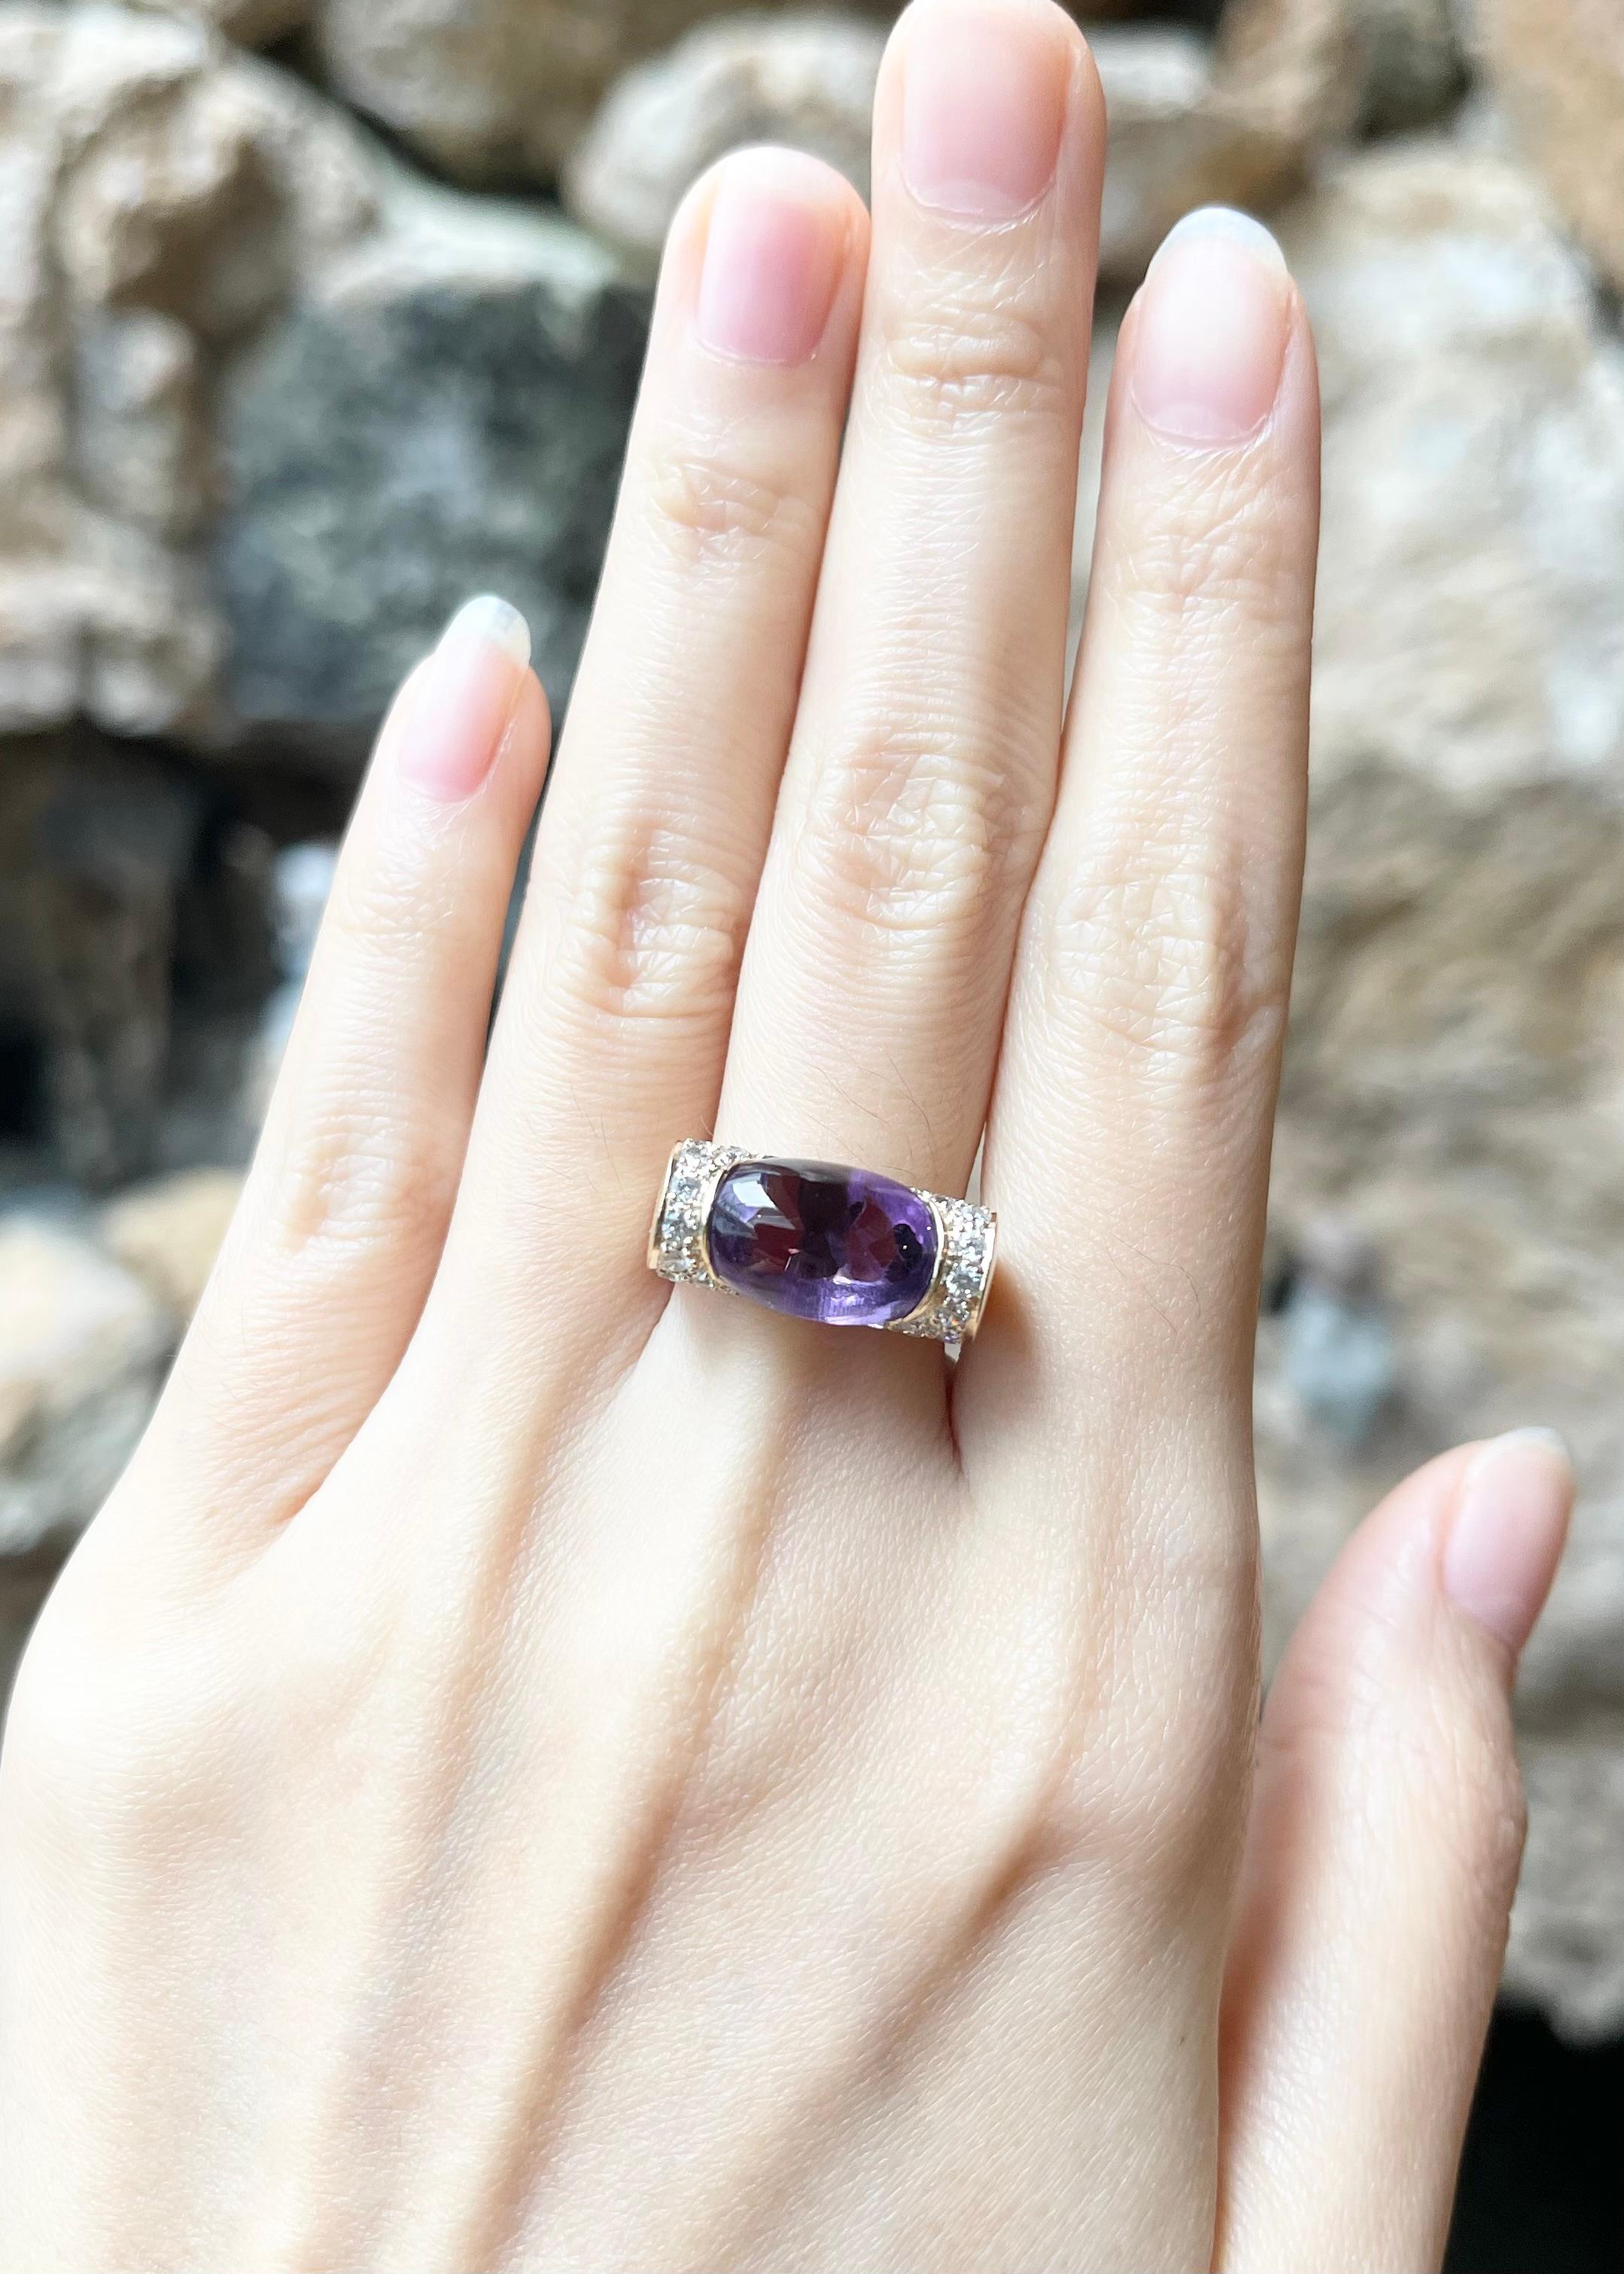 Cabochon Amethyst 5.46 carats with Cubic Zirconia Ring set in 18K Rose Gold Settings

Width:  1.8 cm 
Length: 0.8 cm
Ring Size: 54
Total Weight: 8.21 grams

